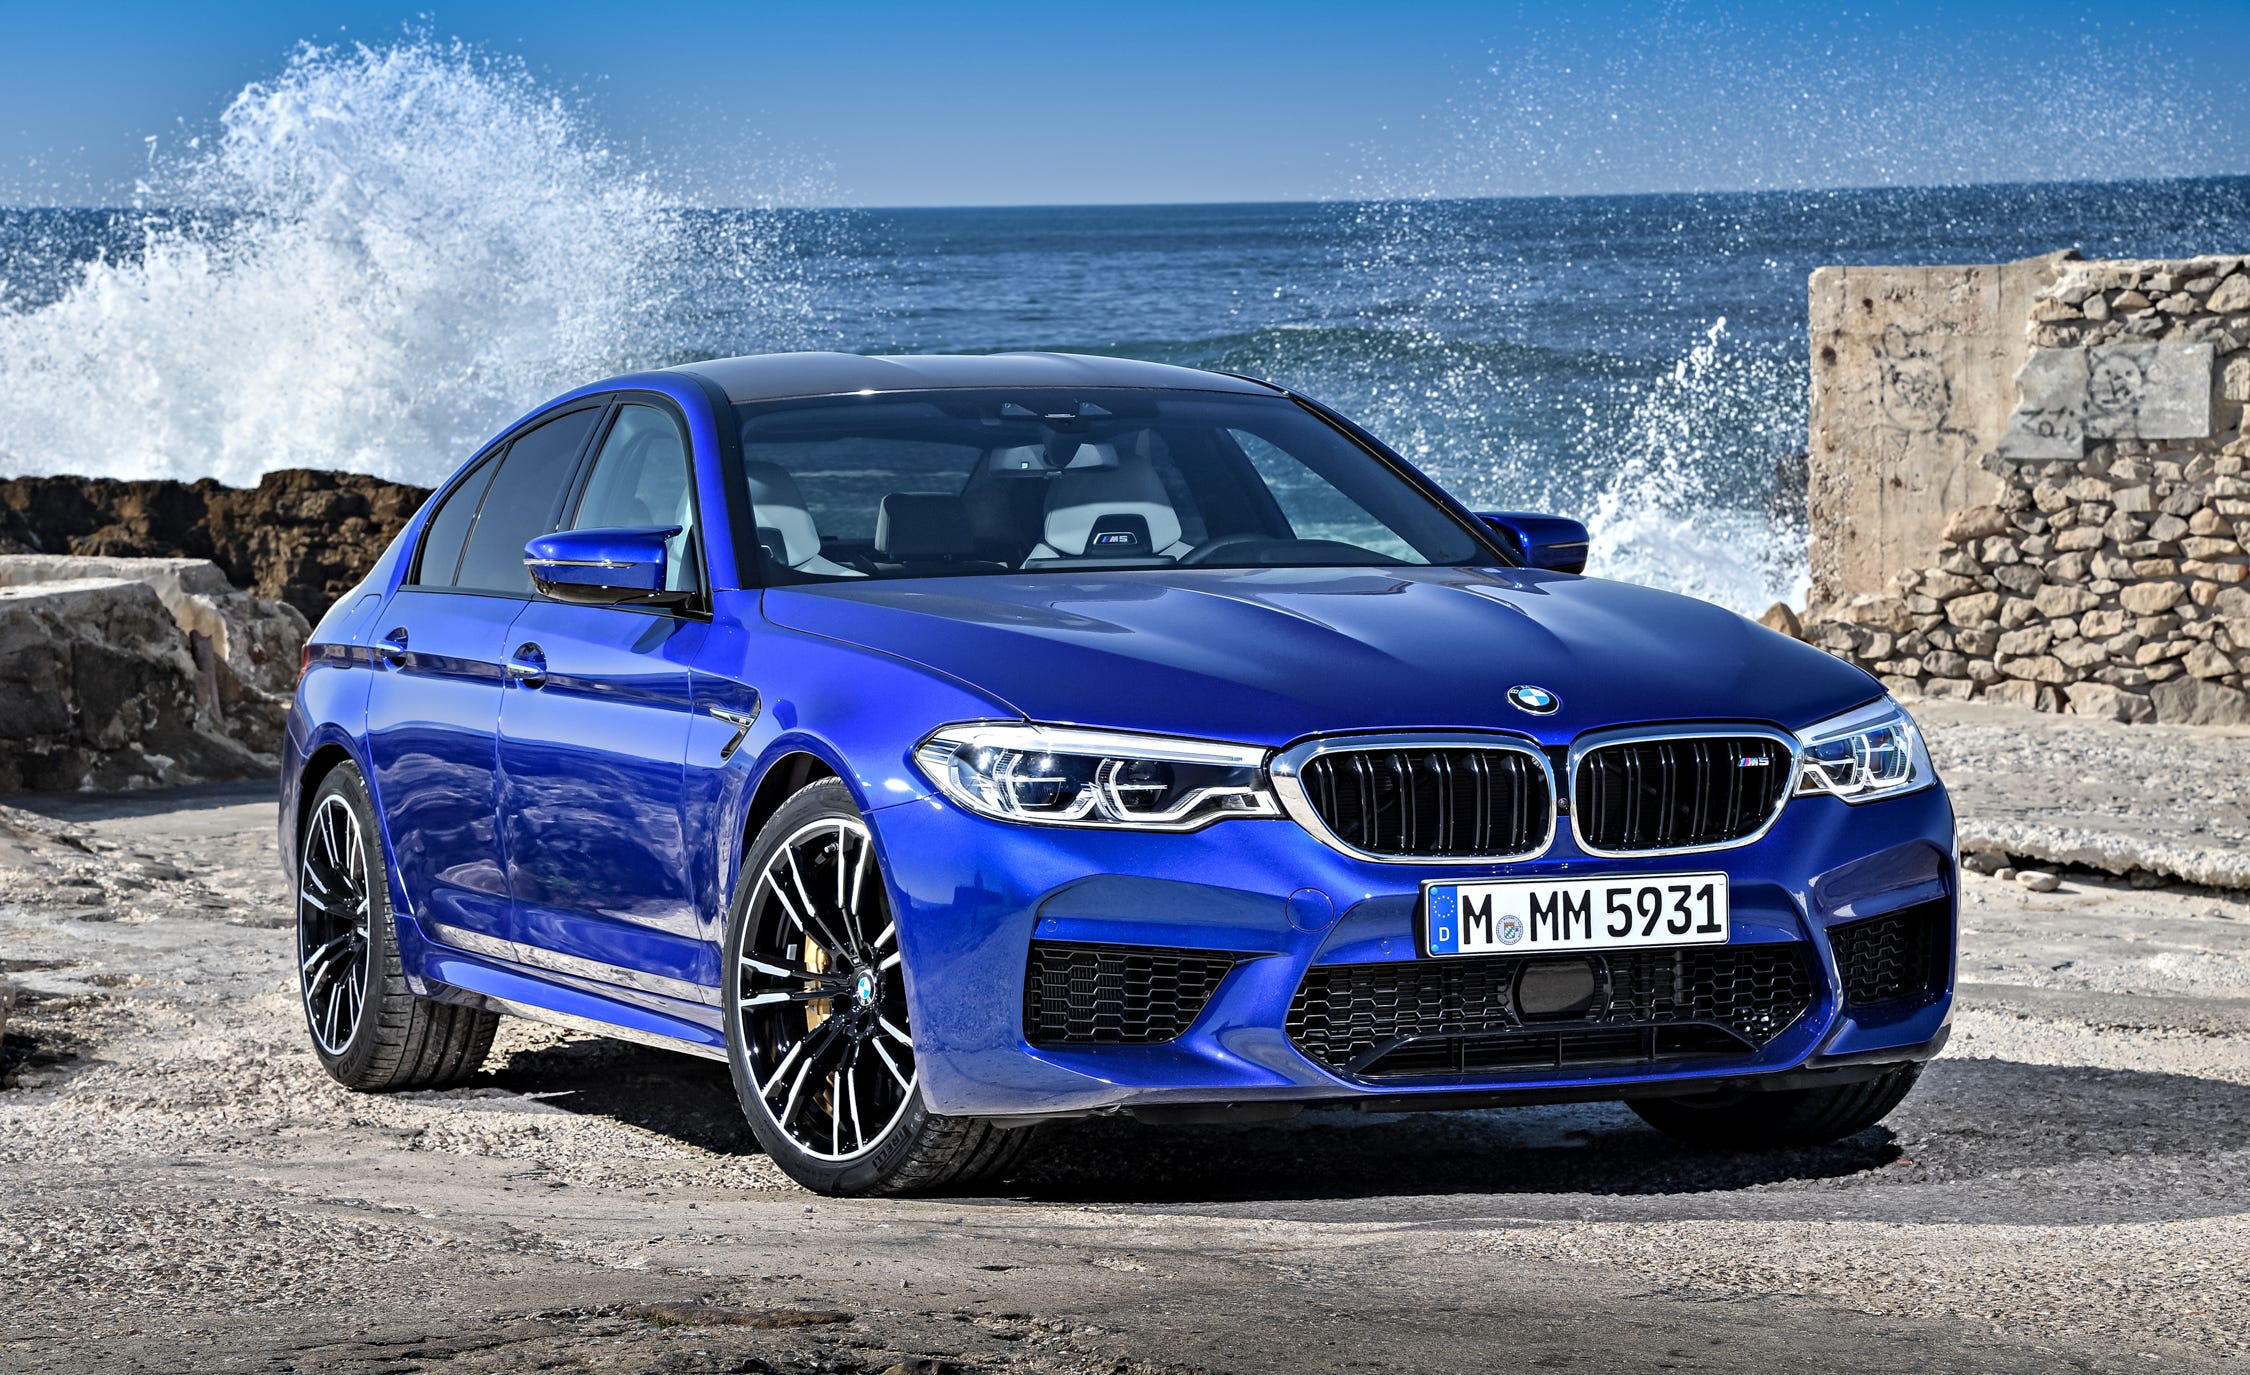 BMW M5 2018 review: Specification, Engine, Speed